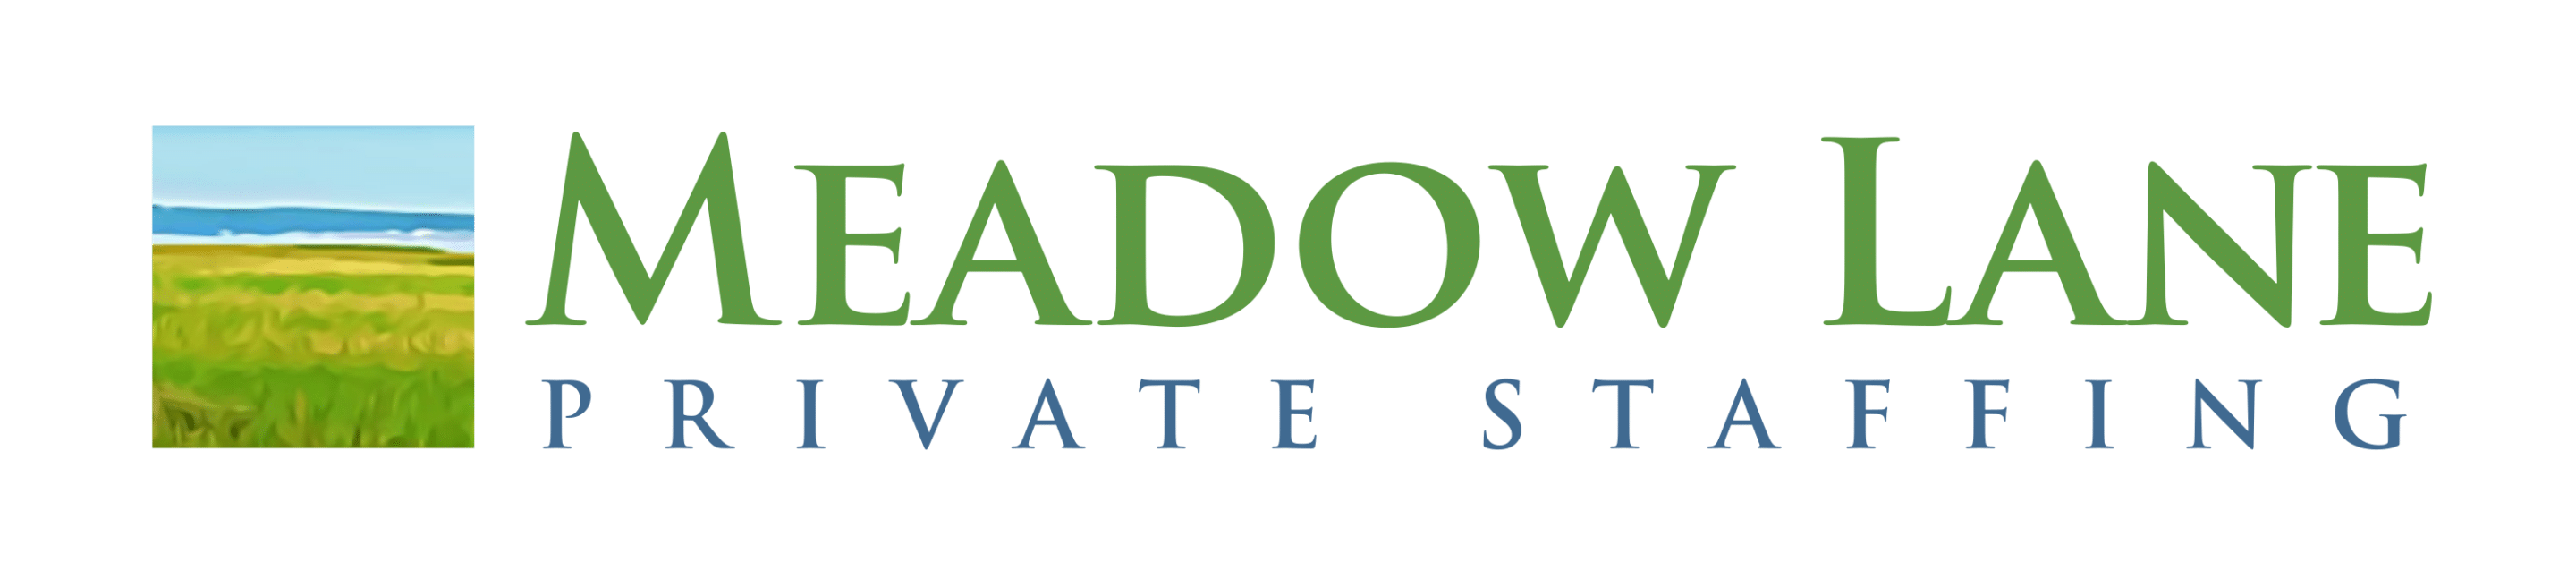 Meadow Lane Private Staffing